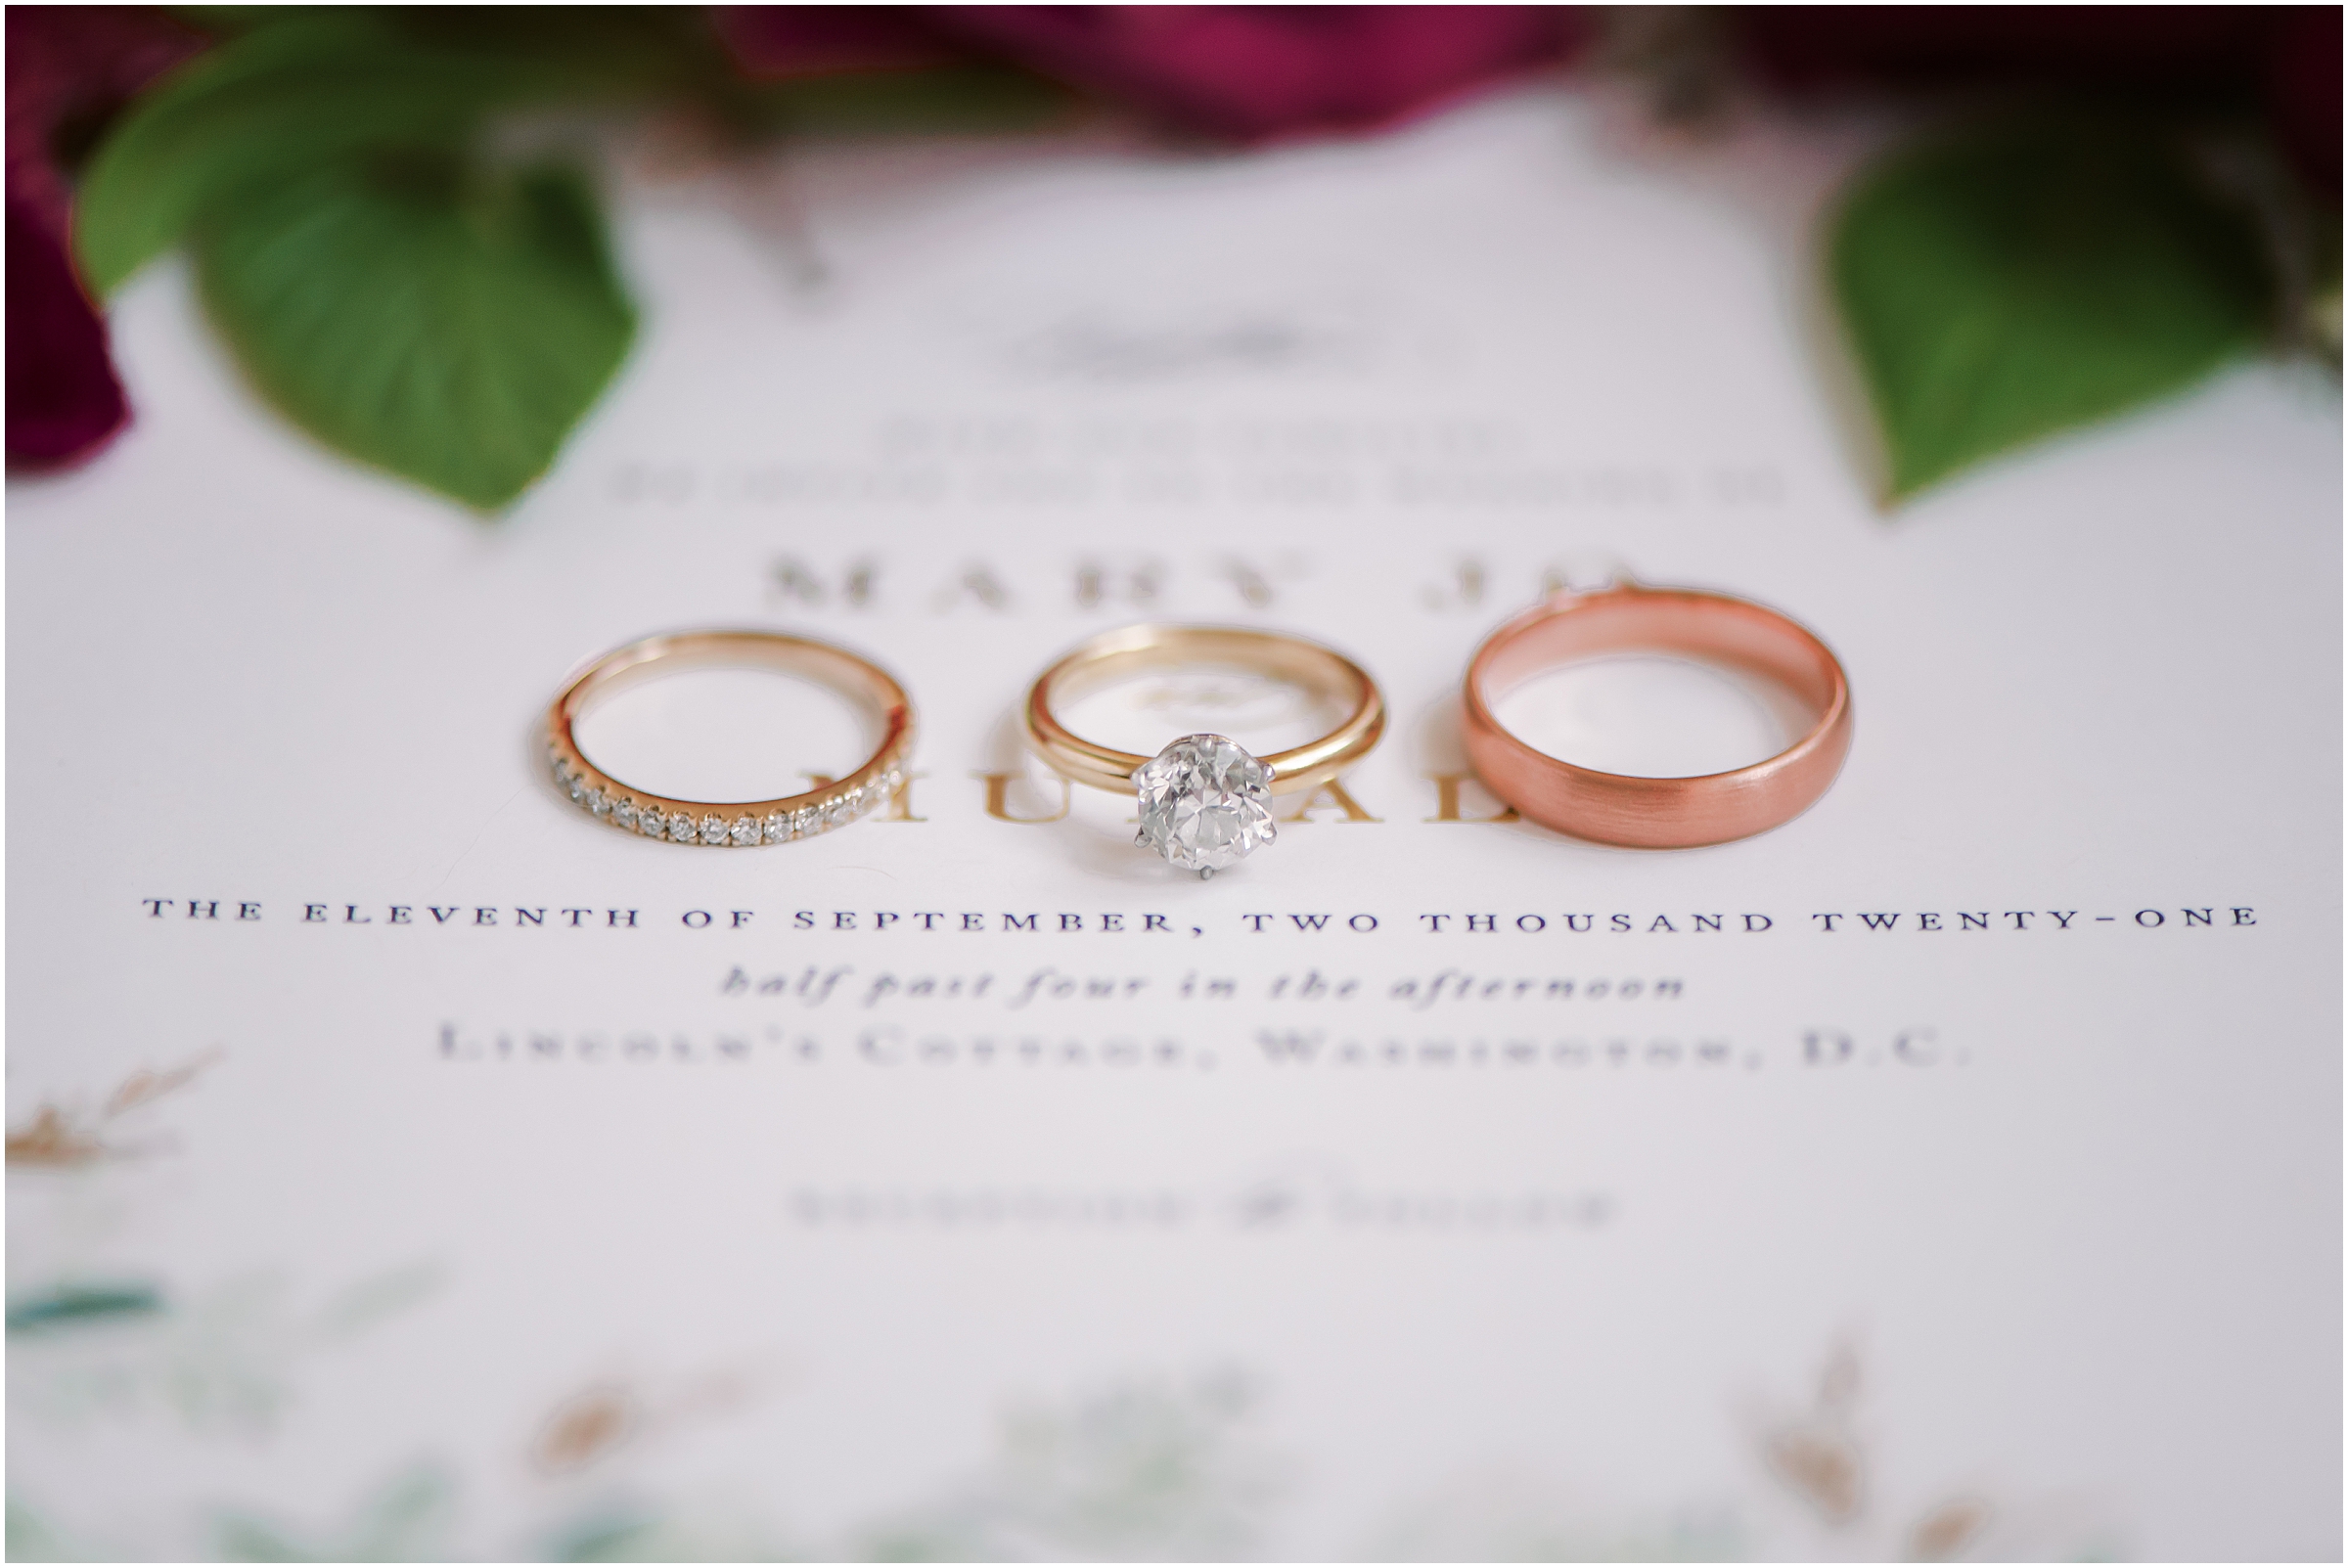 Wedding and engagement rings on invitation